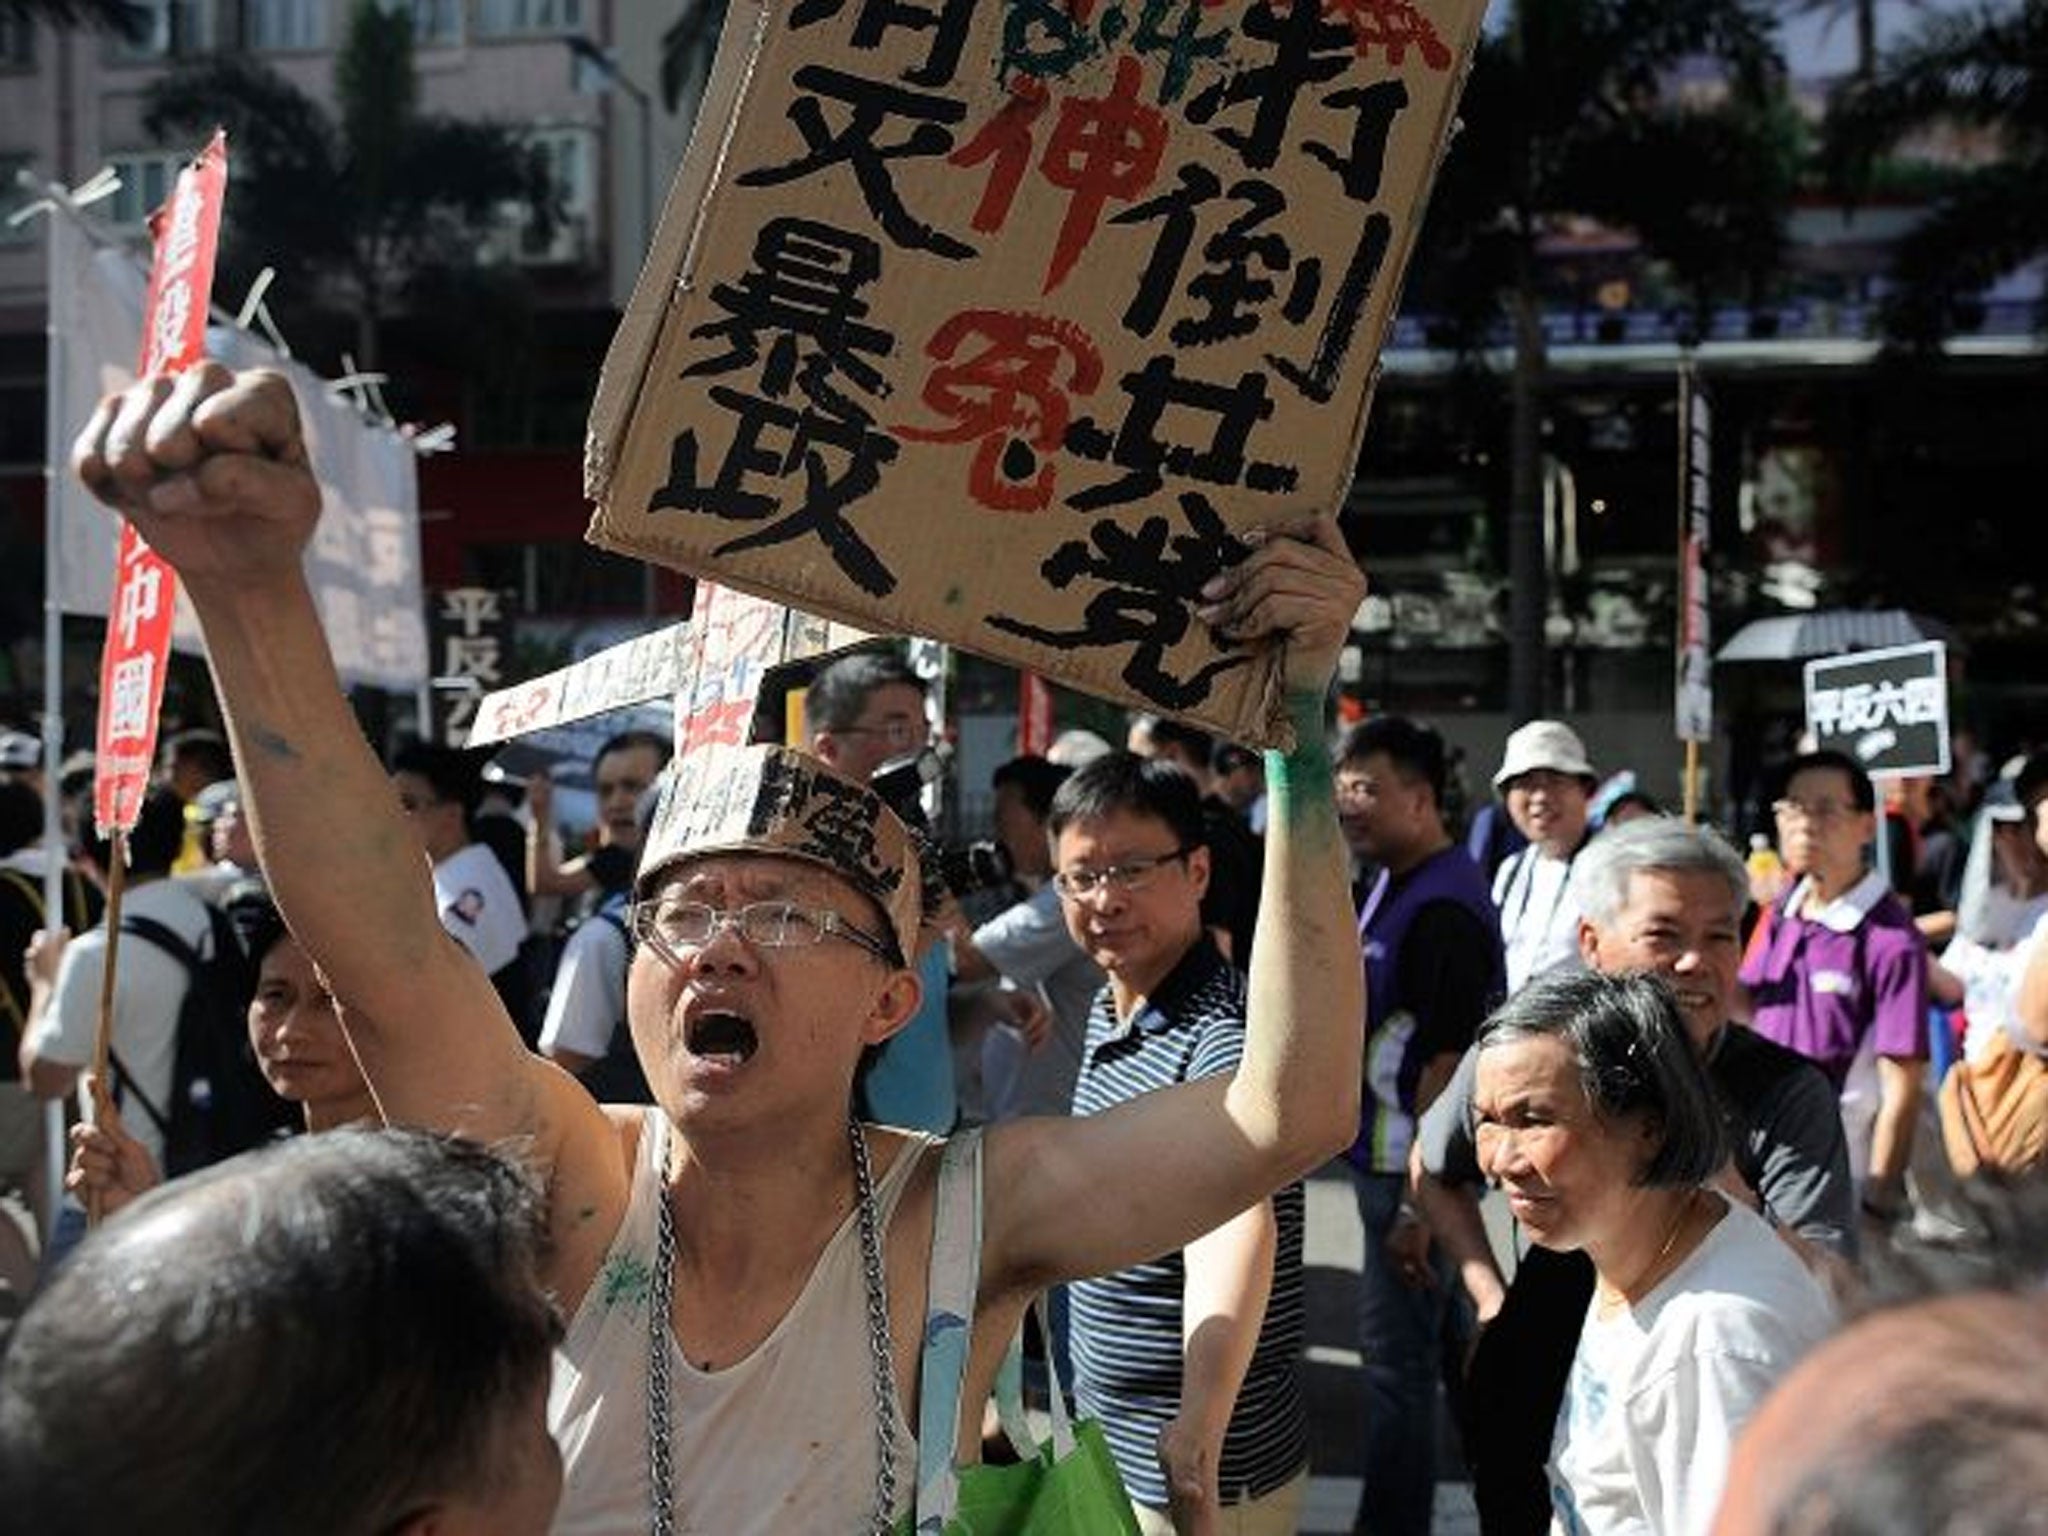 Pro-democracy activists shout slogans as they march on a street during a rally